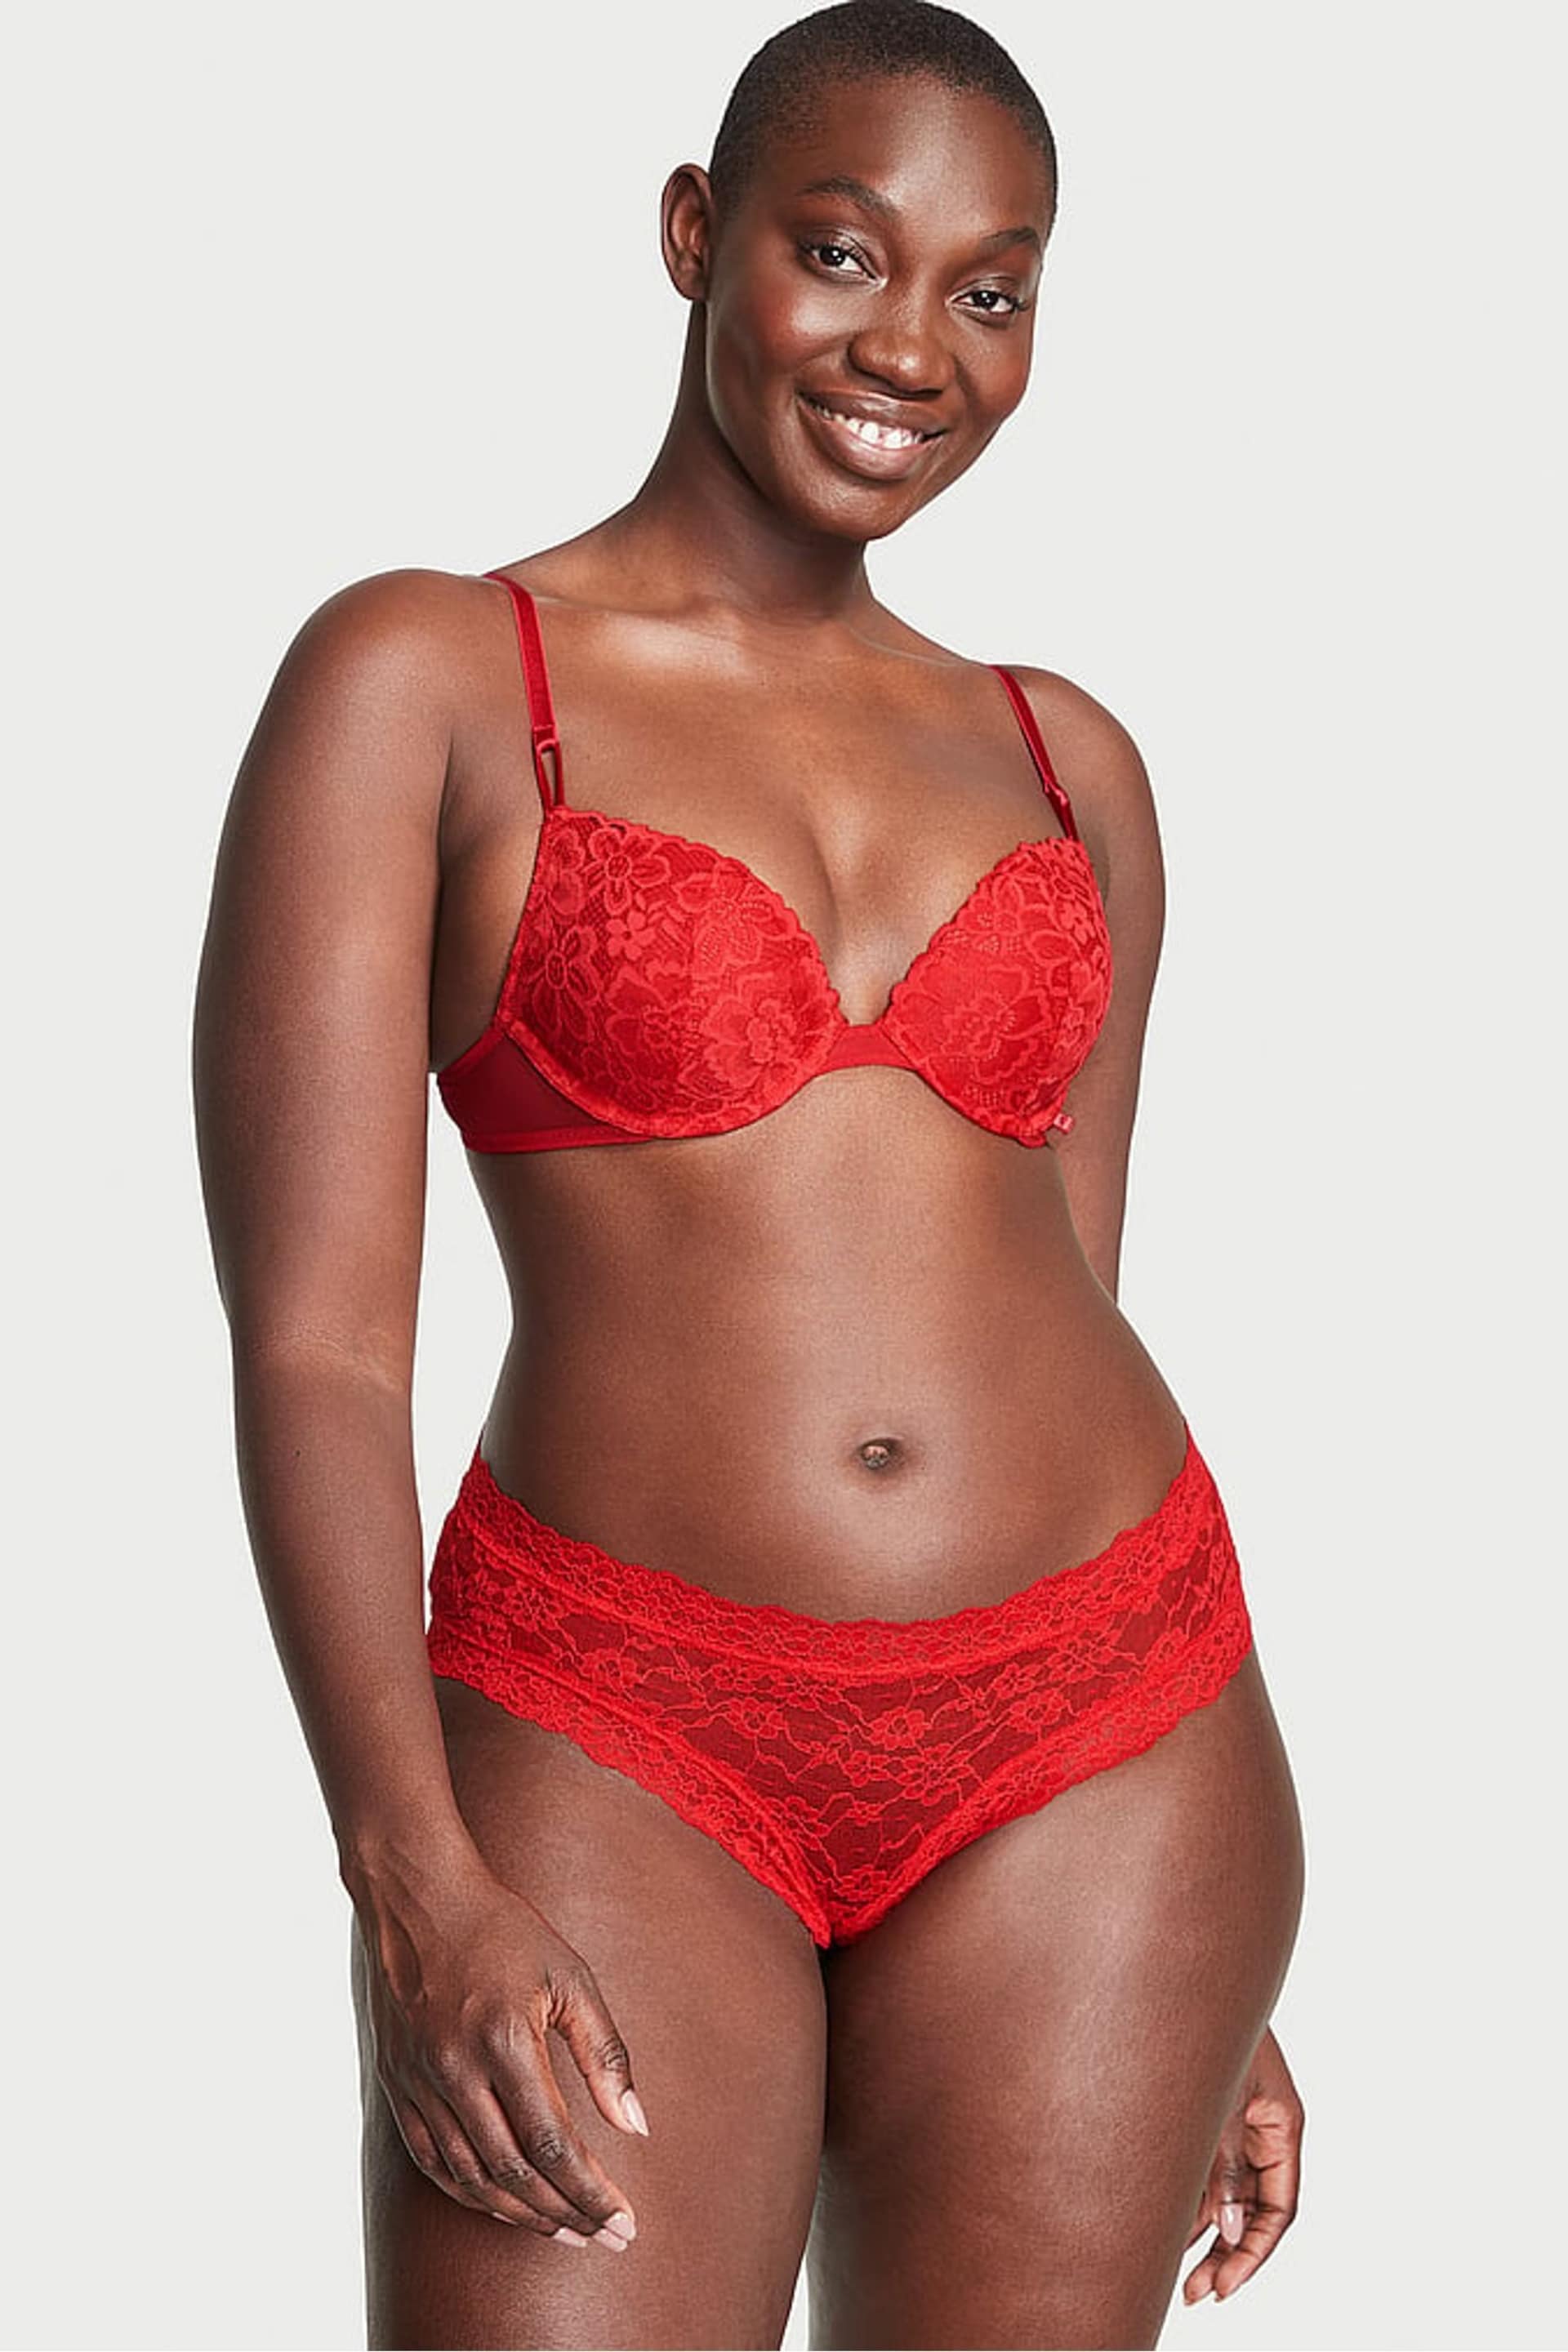 Victoria's Secret Lipstick Red Cheeky Posey Lace Knickers - Image 1 of 3